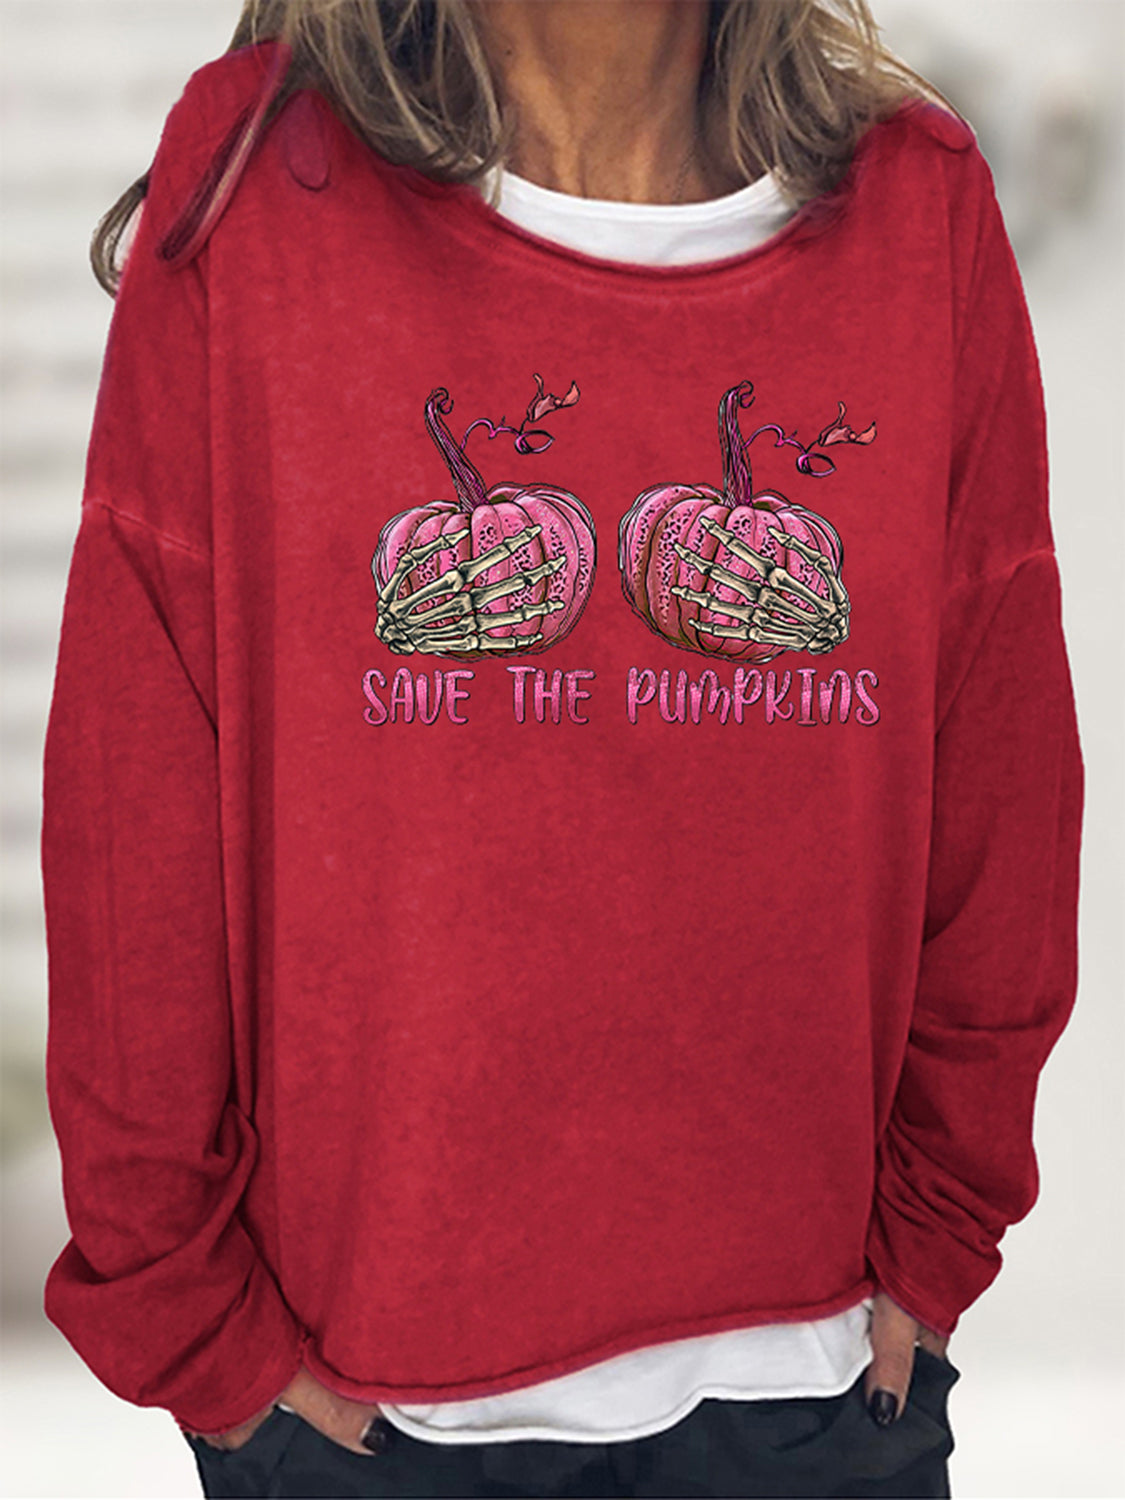 SAVE THE PUMPKIN Graphic Full Size Sweatshirt - Red / S - T-Shirts - Shirts & Tops - 13 - 2024